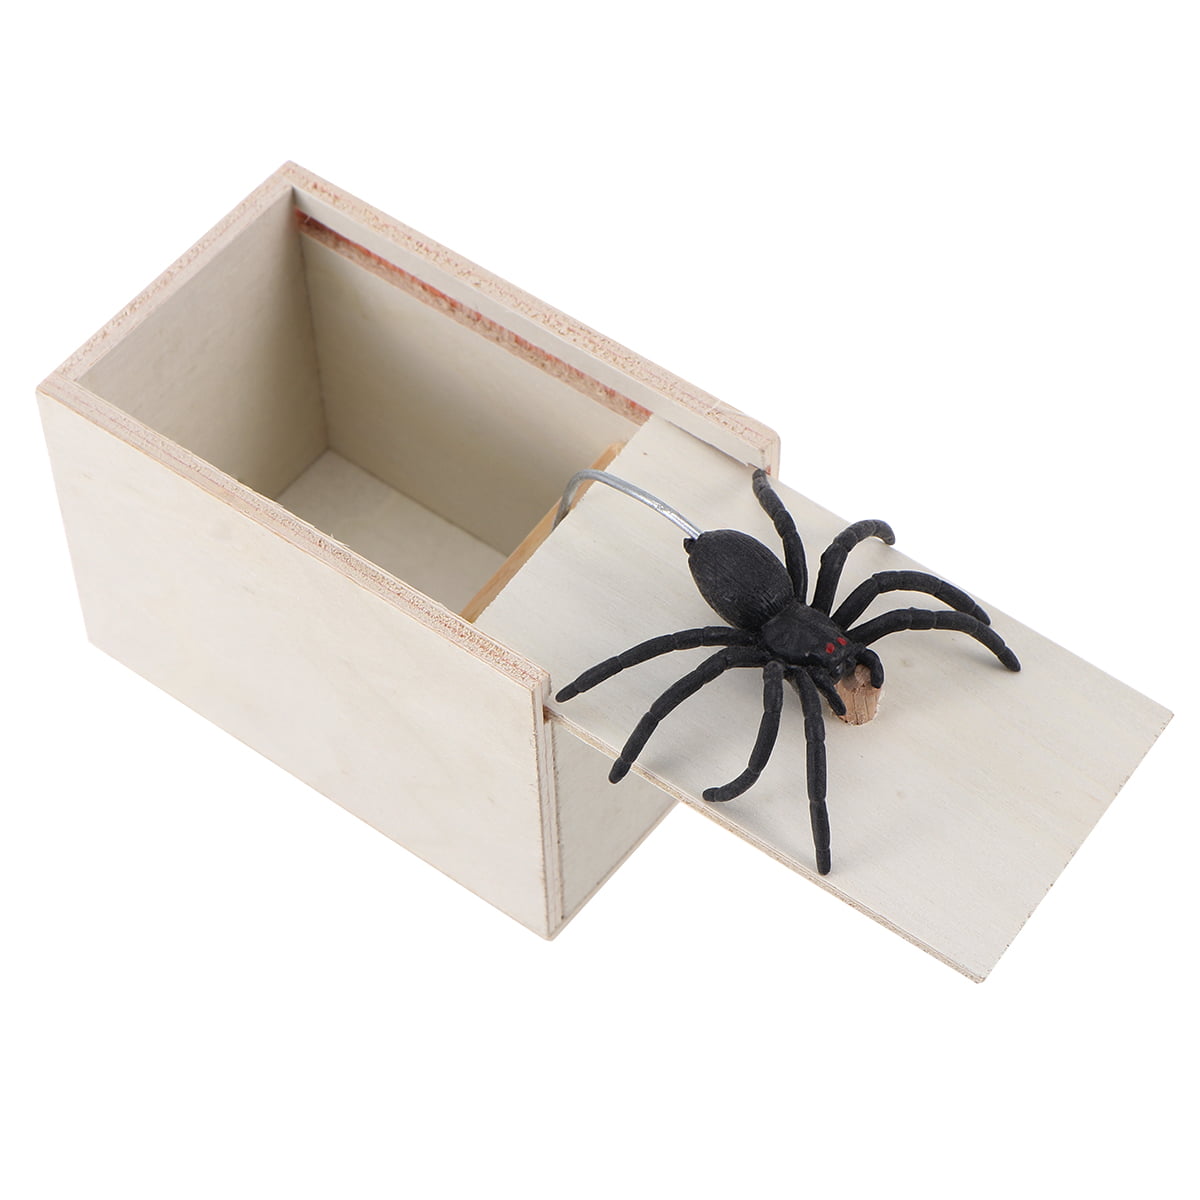 Tricky Spider Toys Unique Horrific Simulation Animal Prop Box for Carnivals 